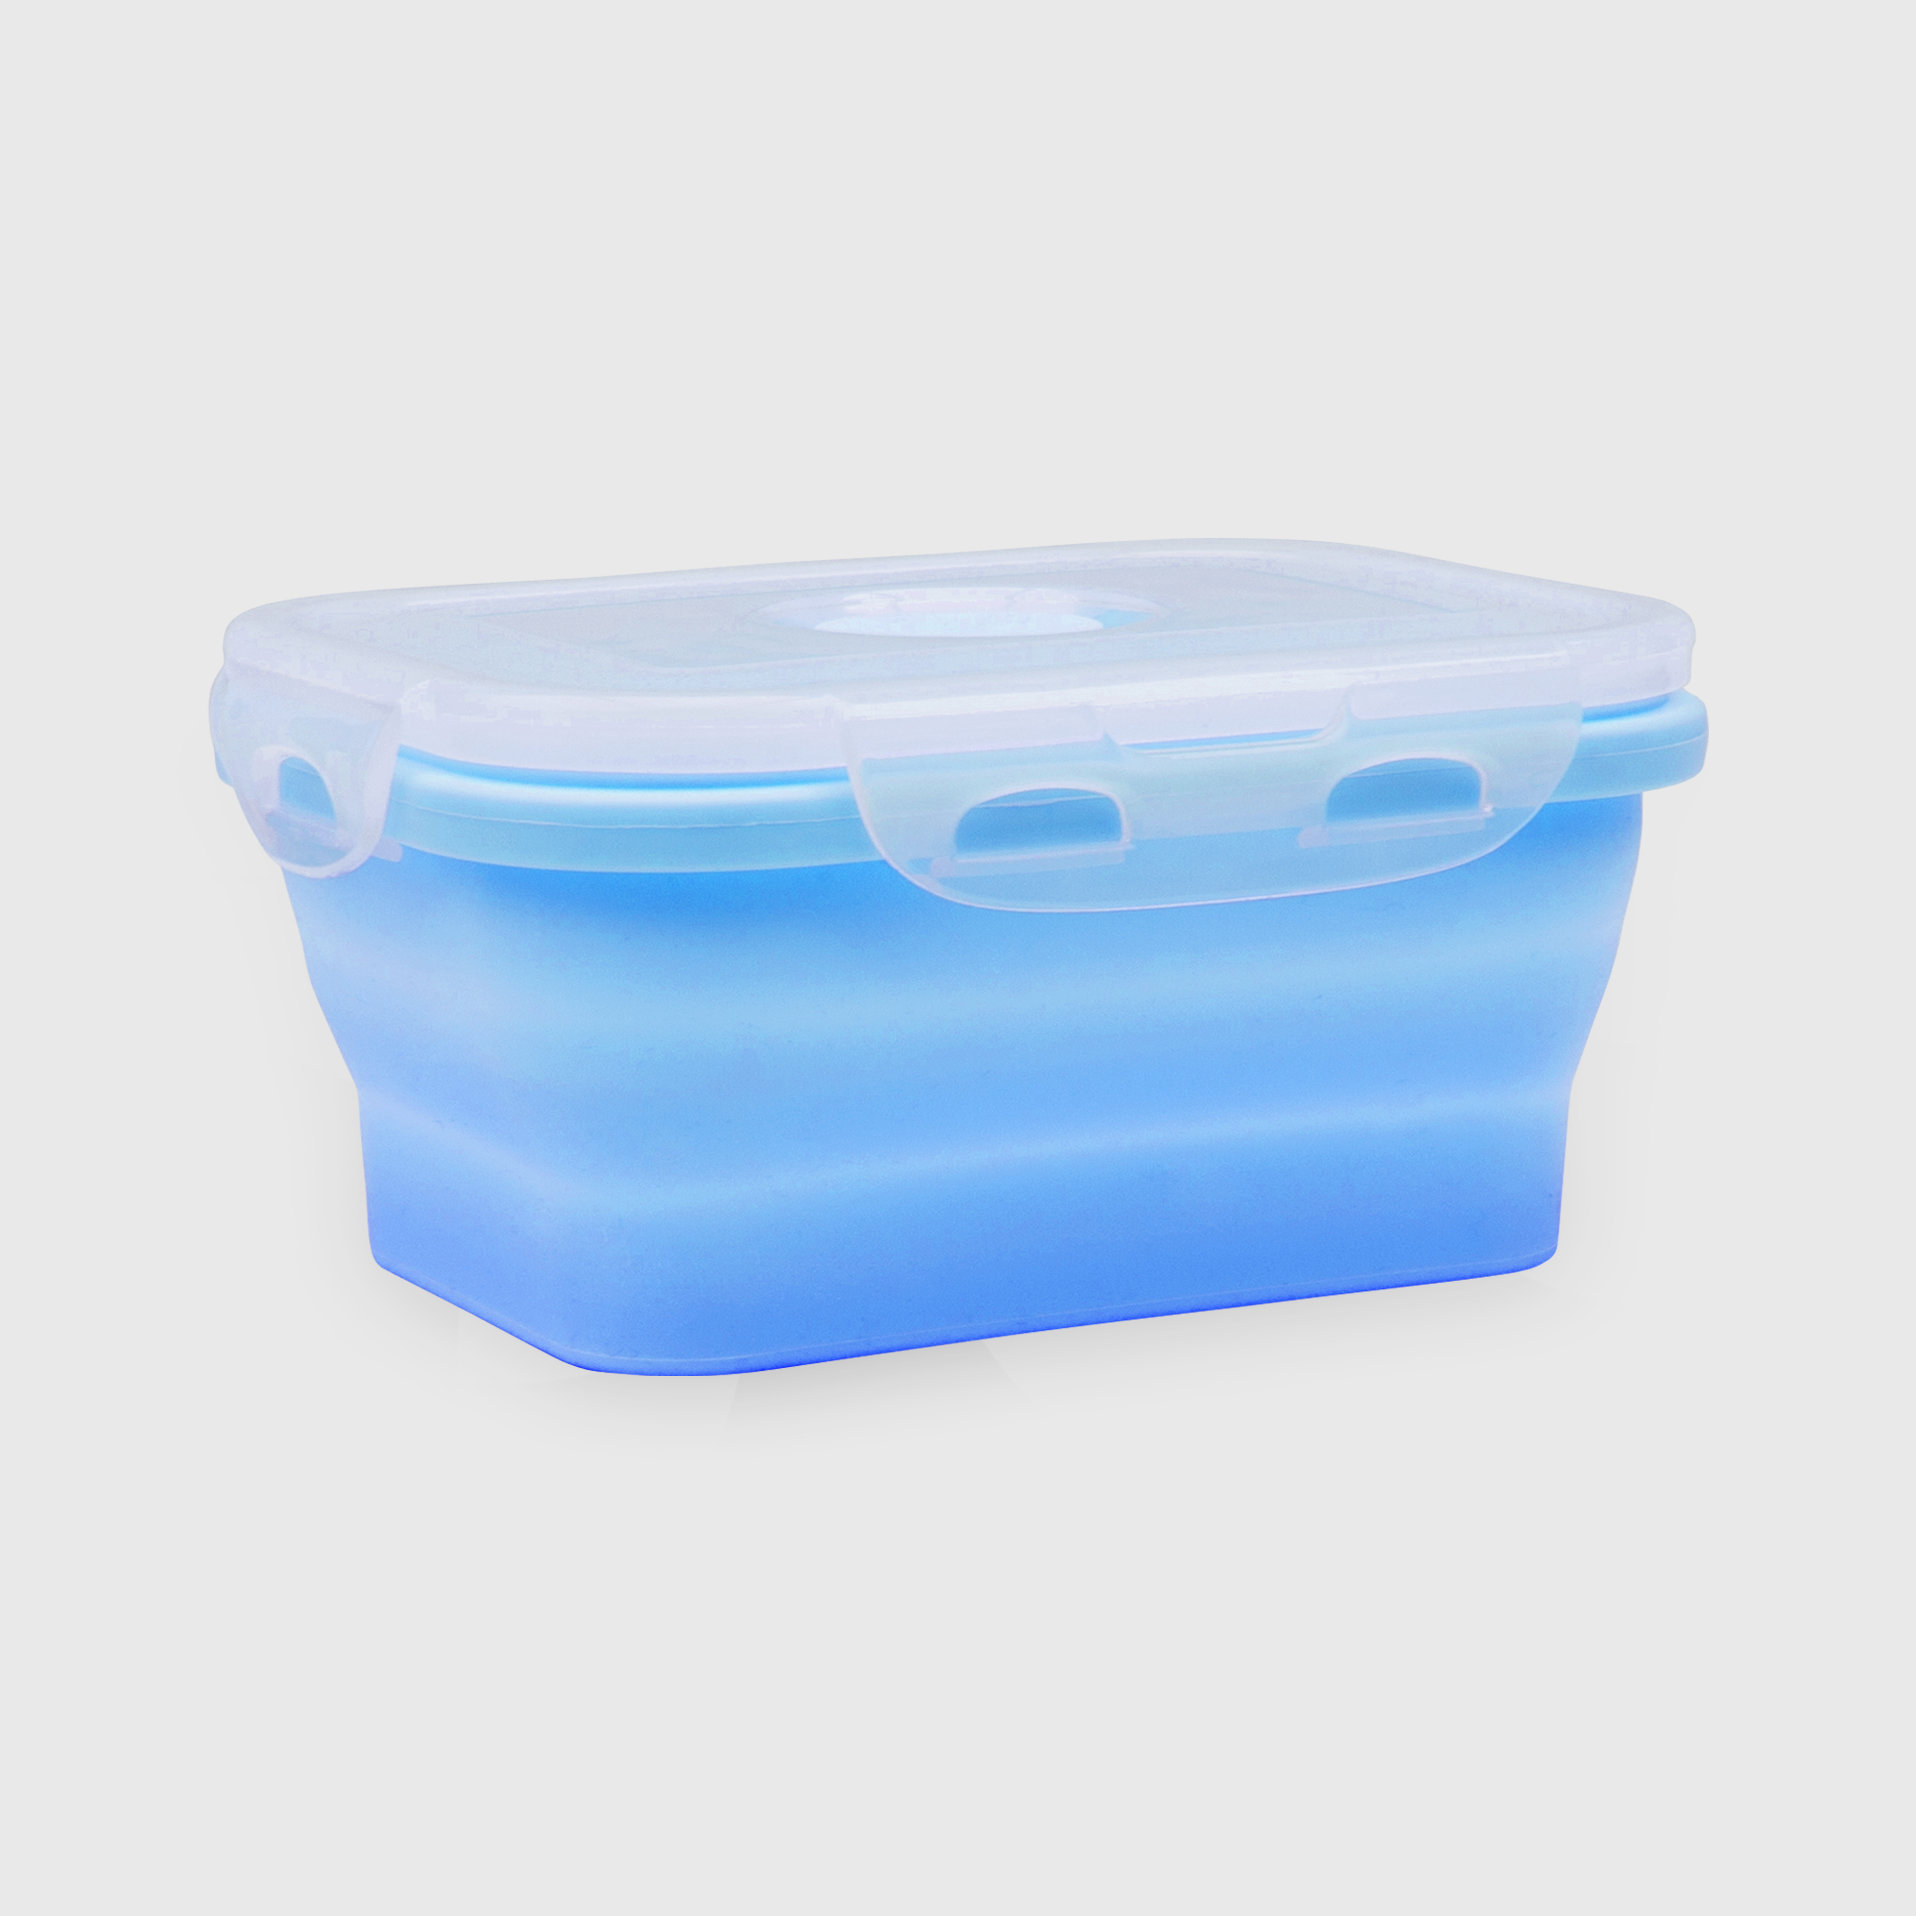 Collapsible silicone lunchbox in blue